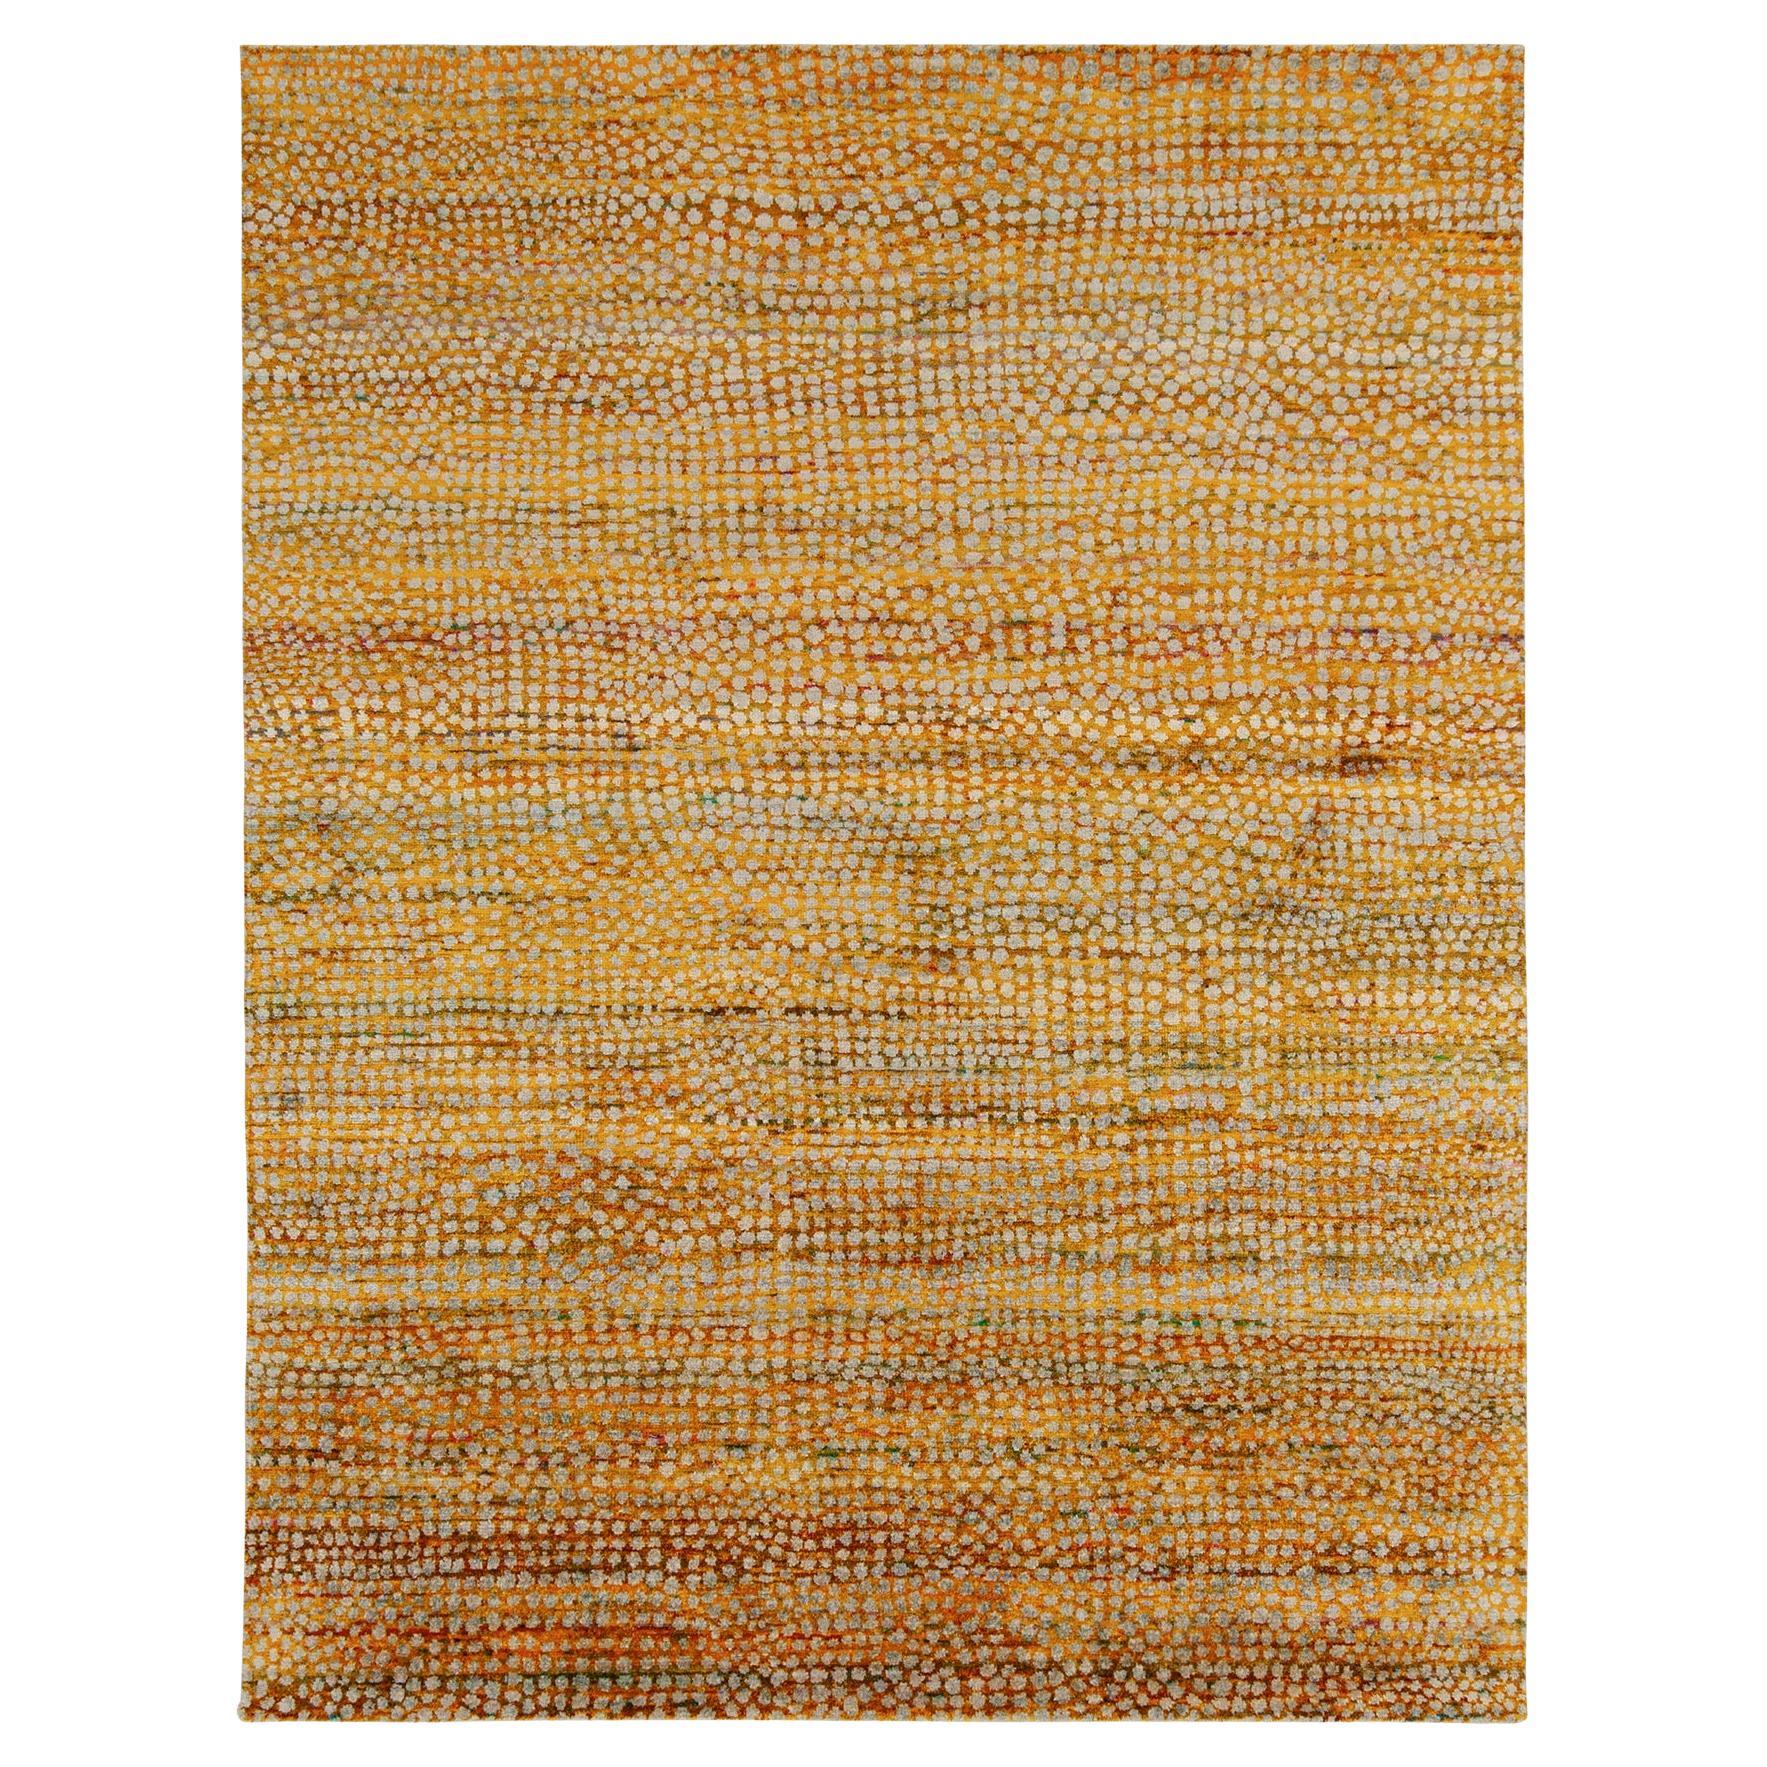 Rug & Kilim’s Contemporary Rug in Golden-Yellow with White Dots Pattern